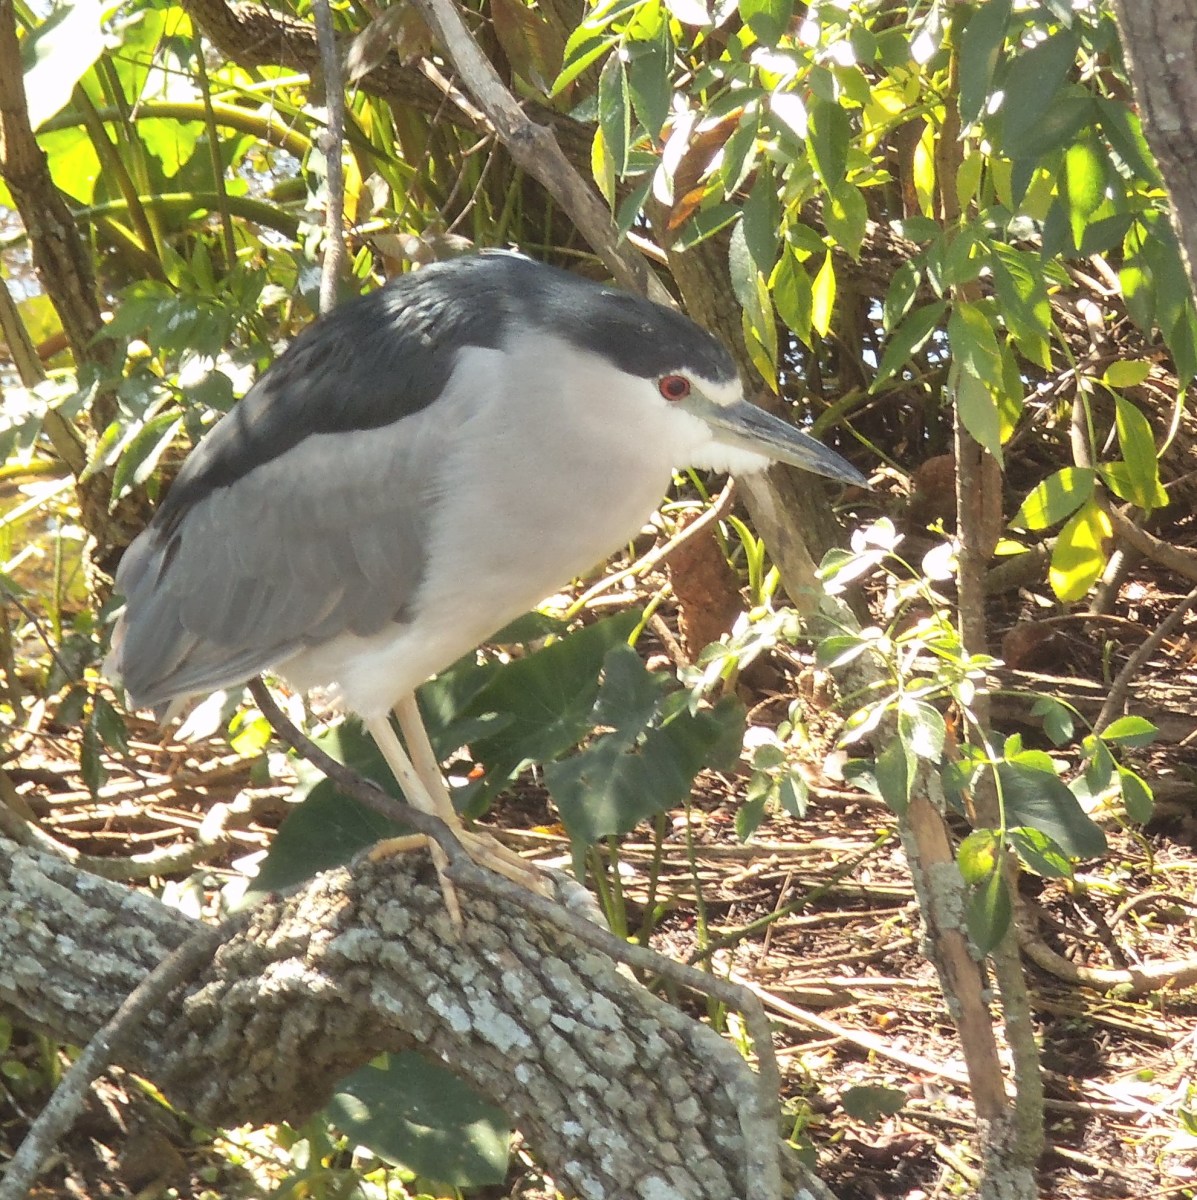 This one is shorter, and bulkier than the other herons. 